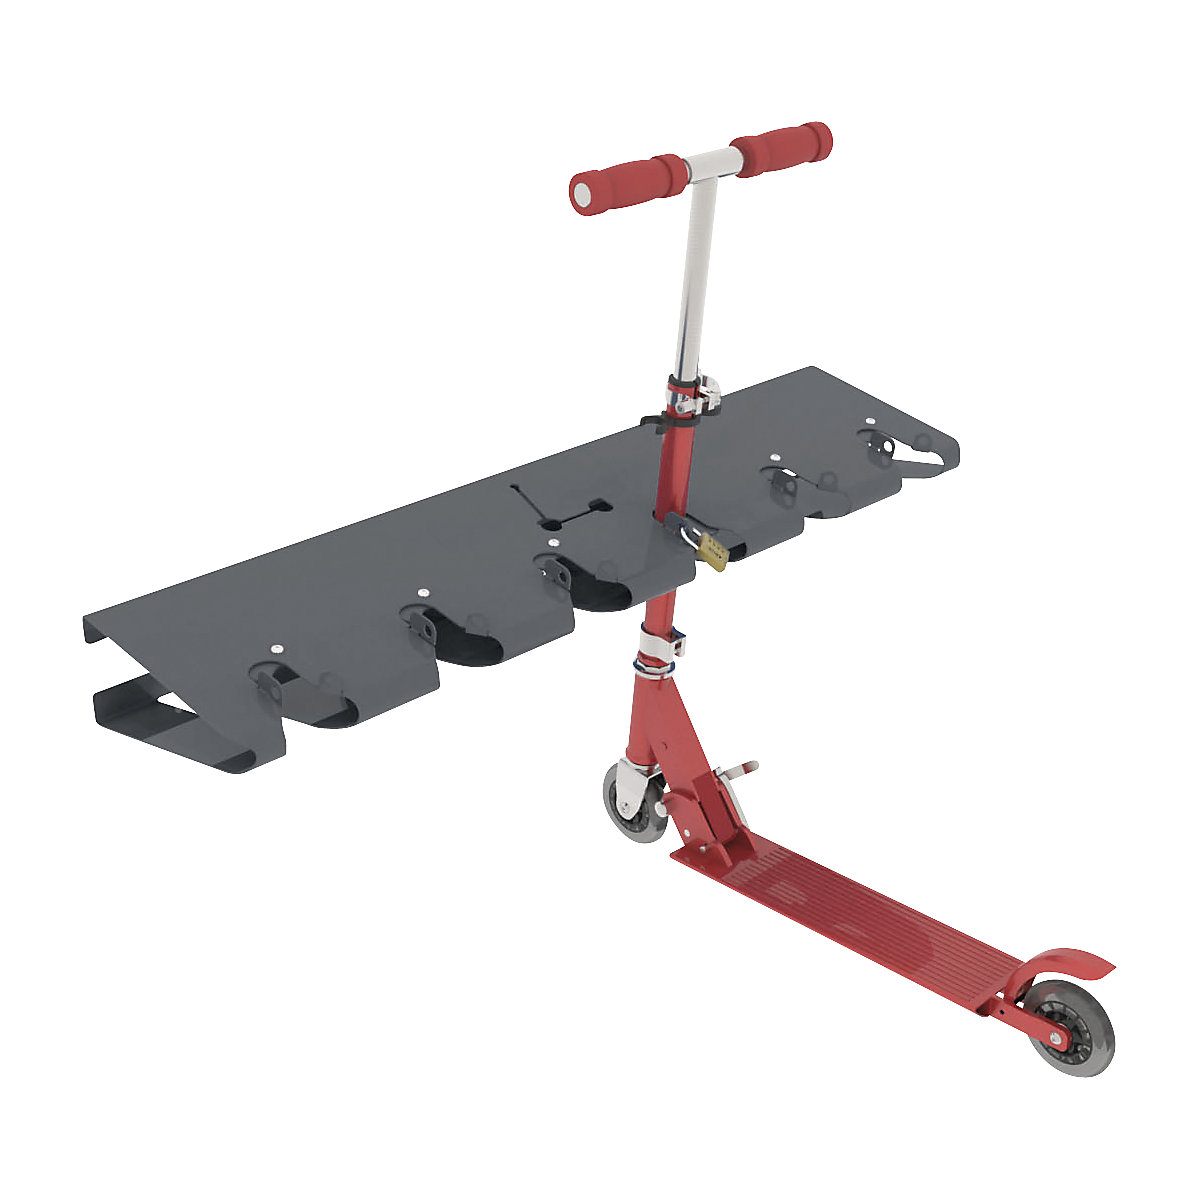 Pedal scooter stand – PROCITY